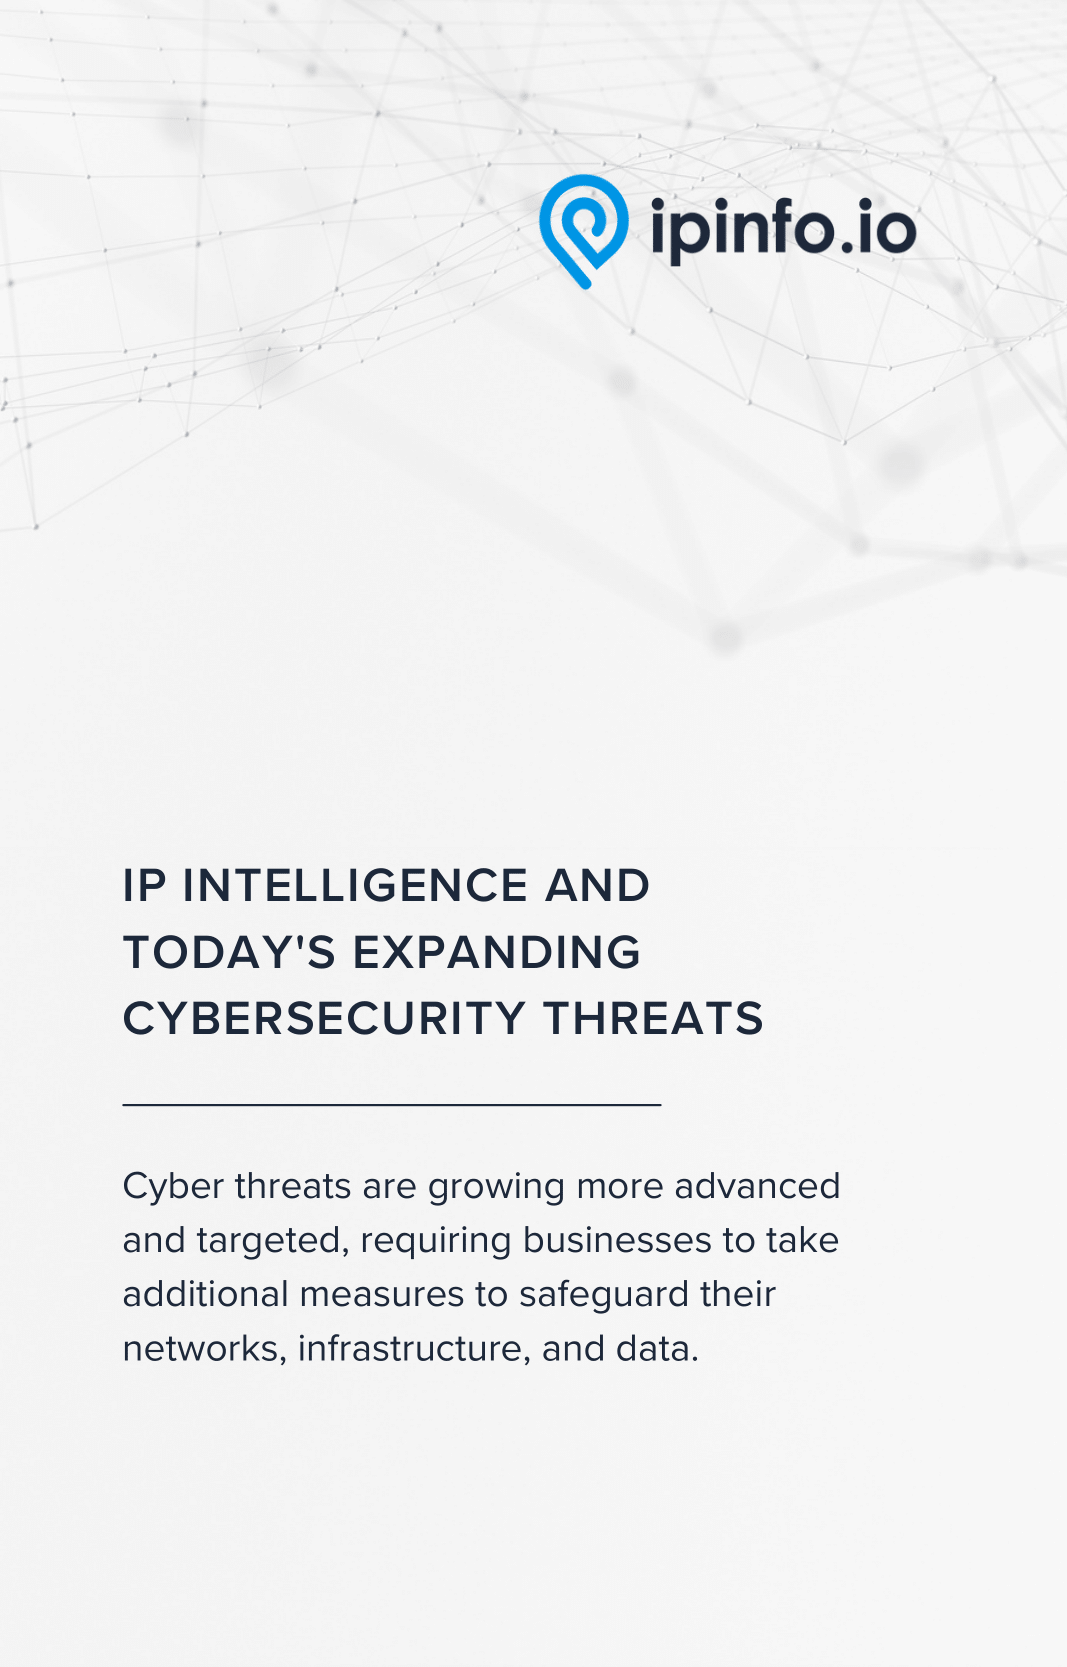 IP Intelligence and Today's Expanding Cybersecurity Threats